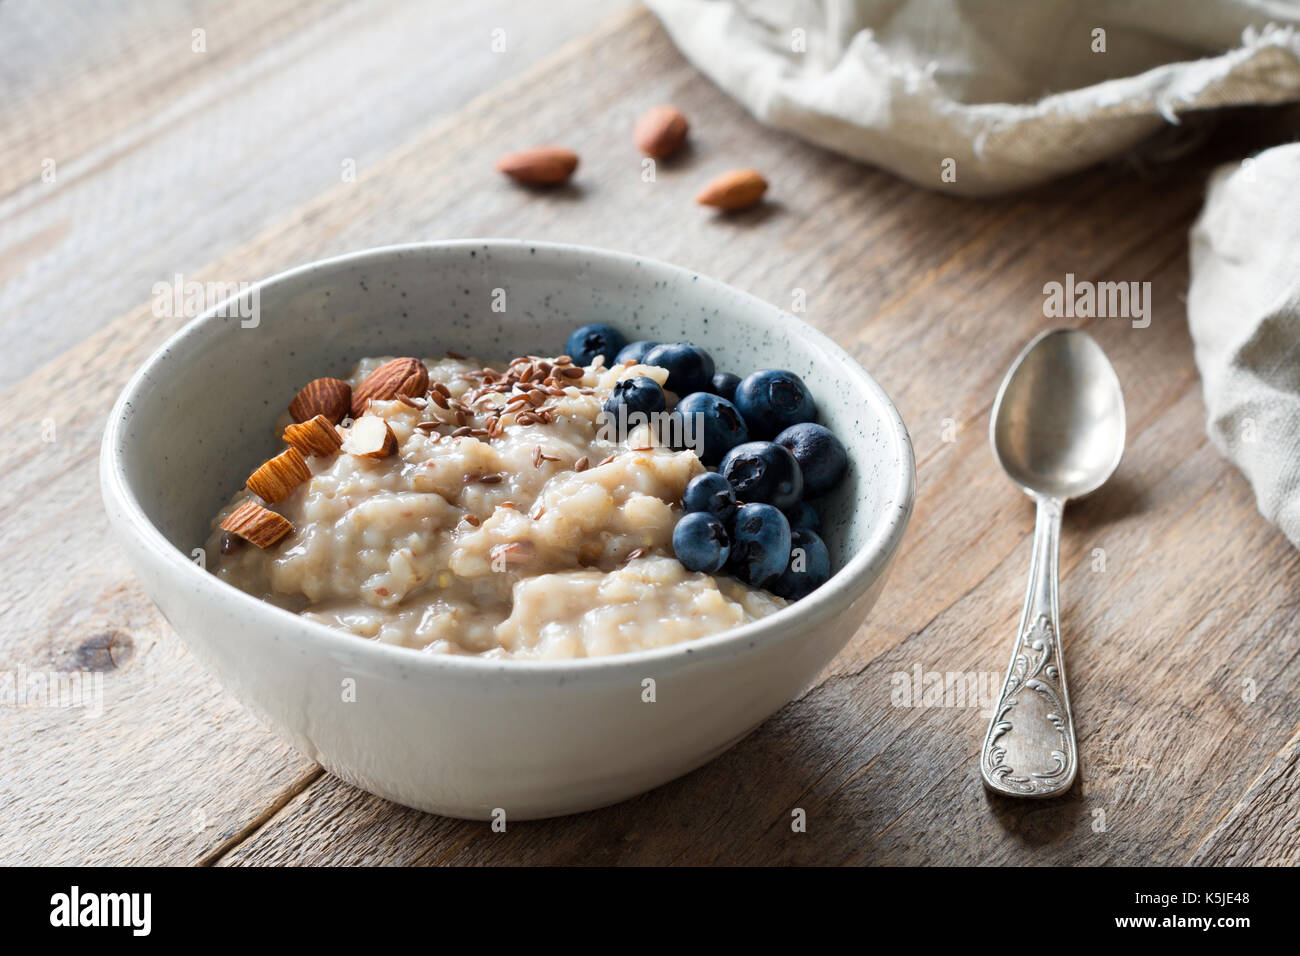 Oatmeal porridge with blueberries, almonds, linseeds in bowl on wooden table. Super food for healthy nutritious breakfast Stock Photo